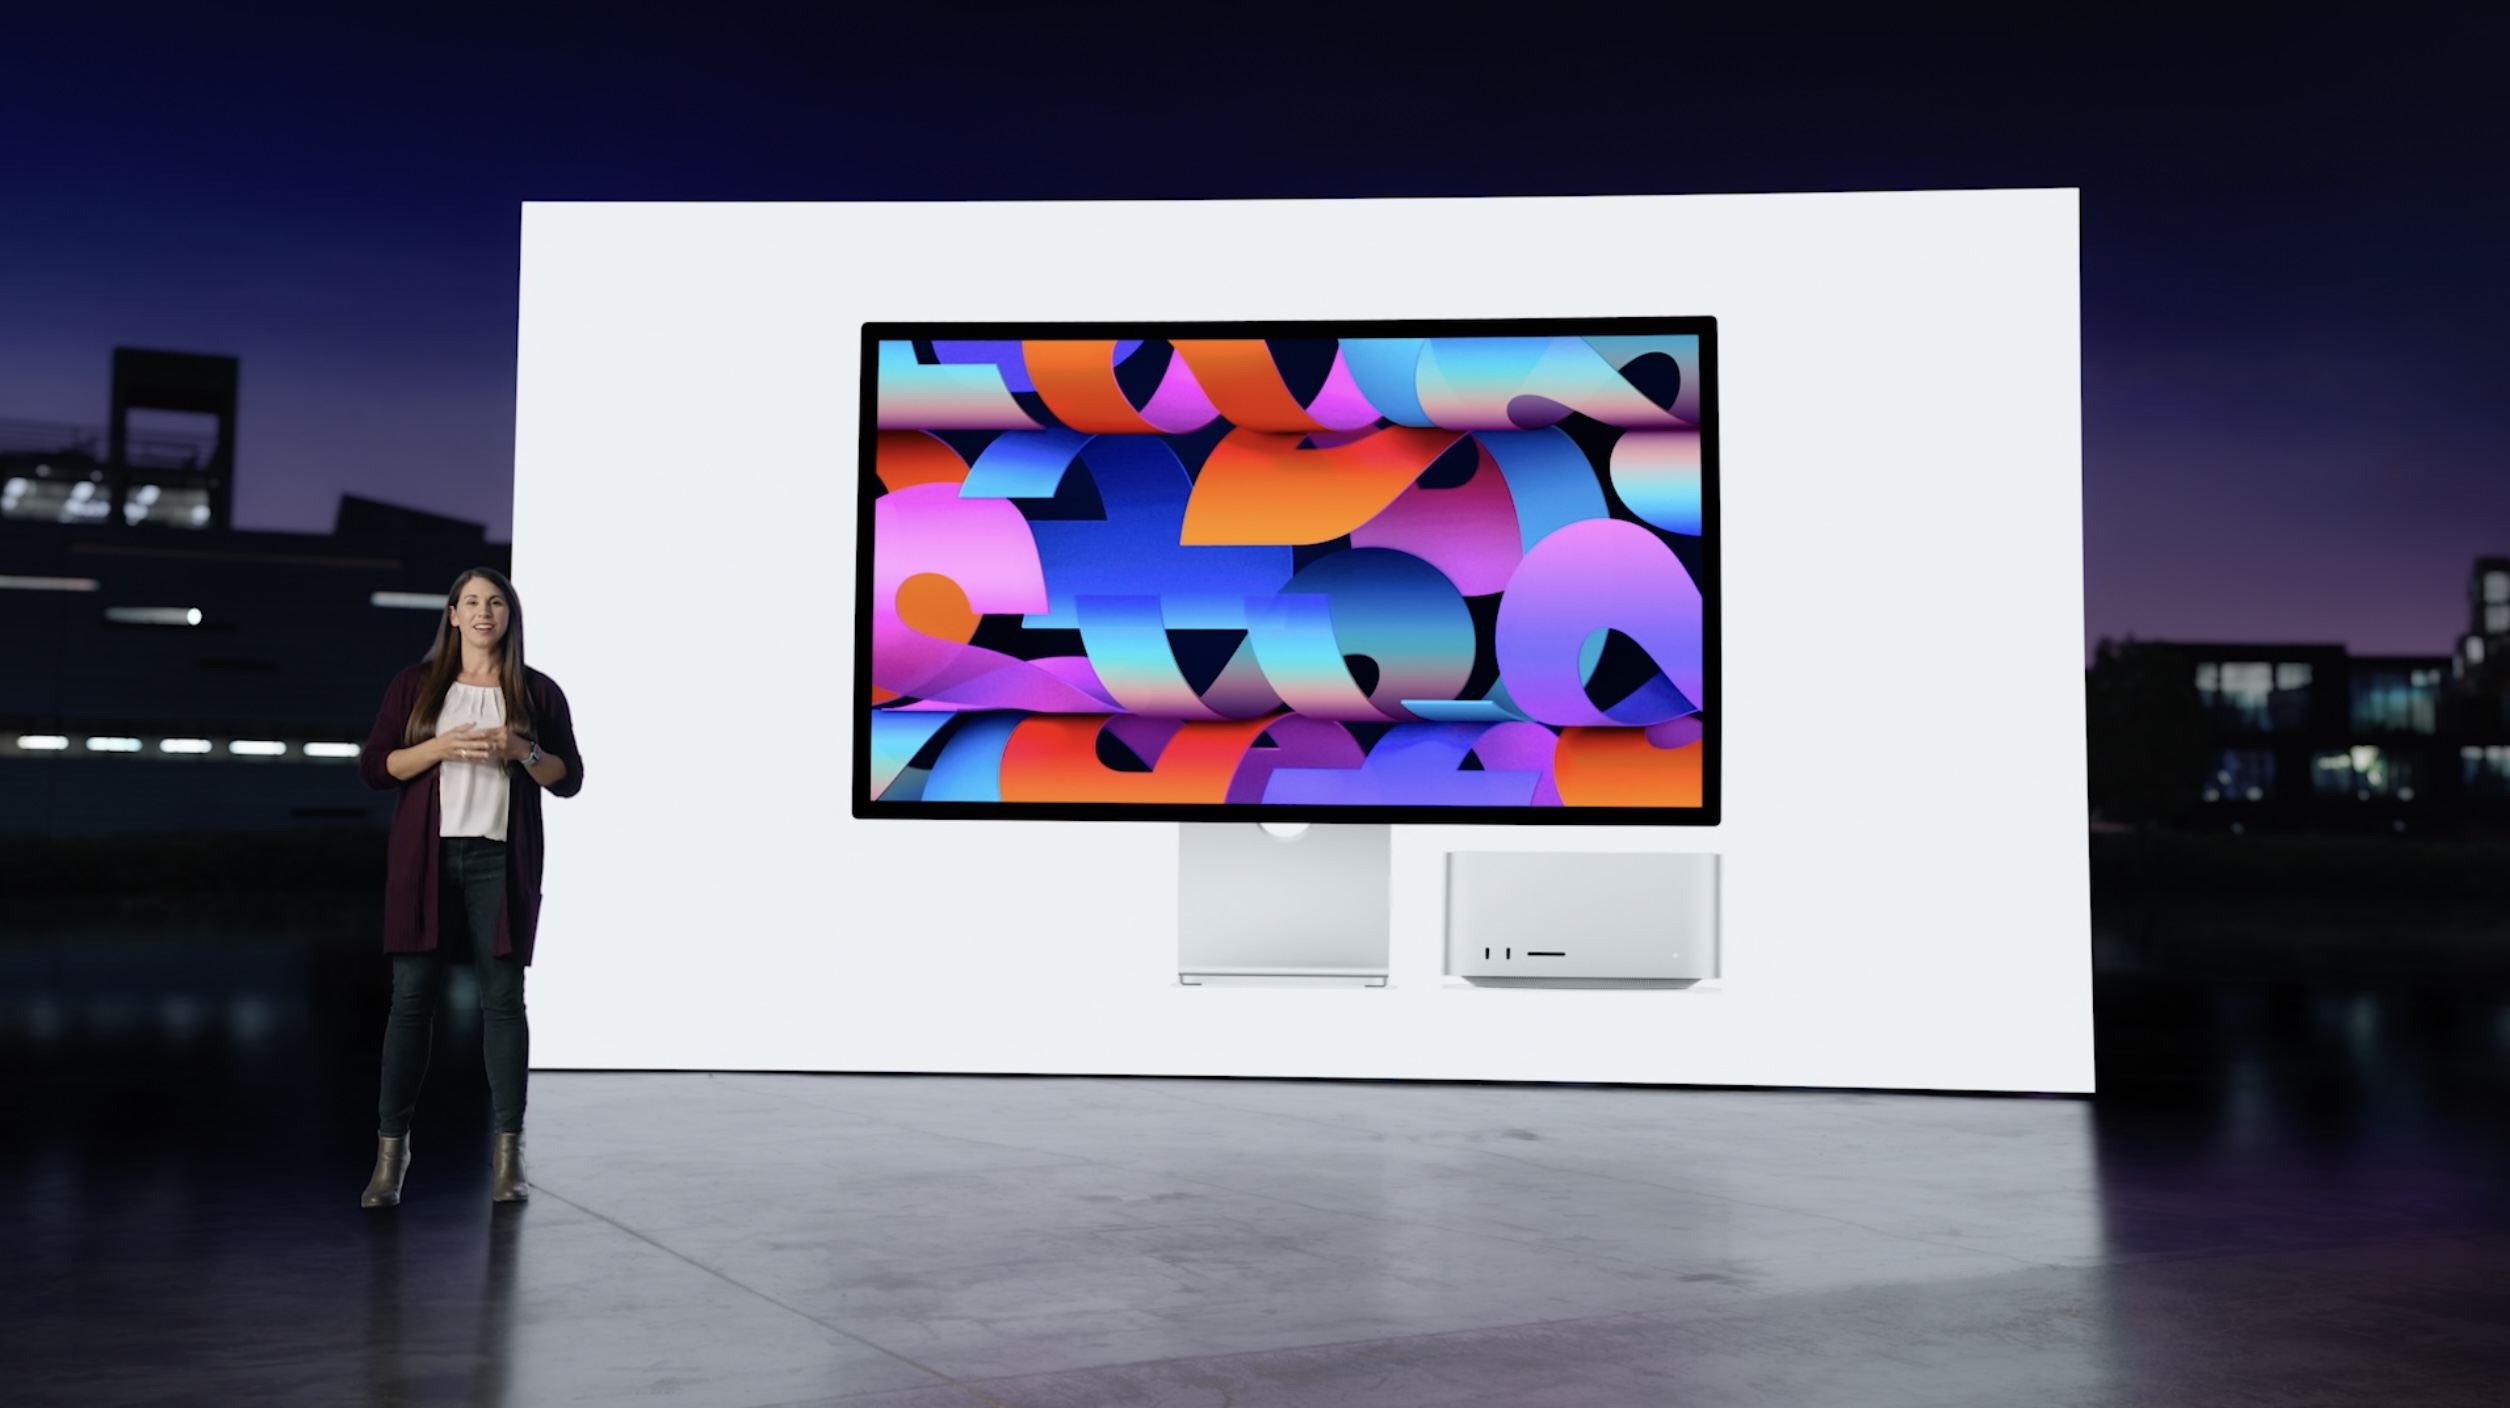 Apple's Studio Display doesn't shine in the light of competition